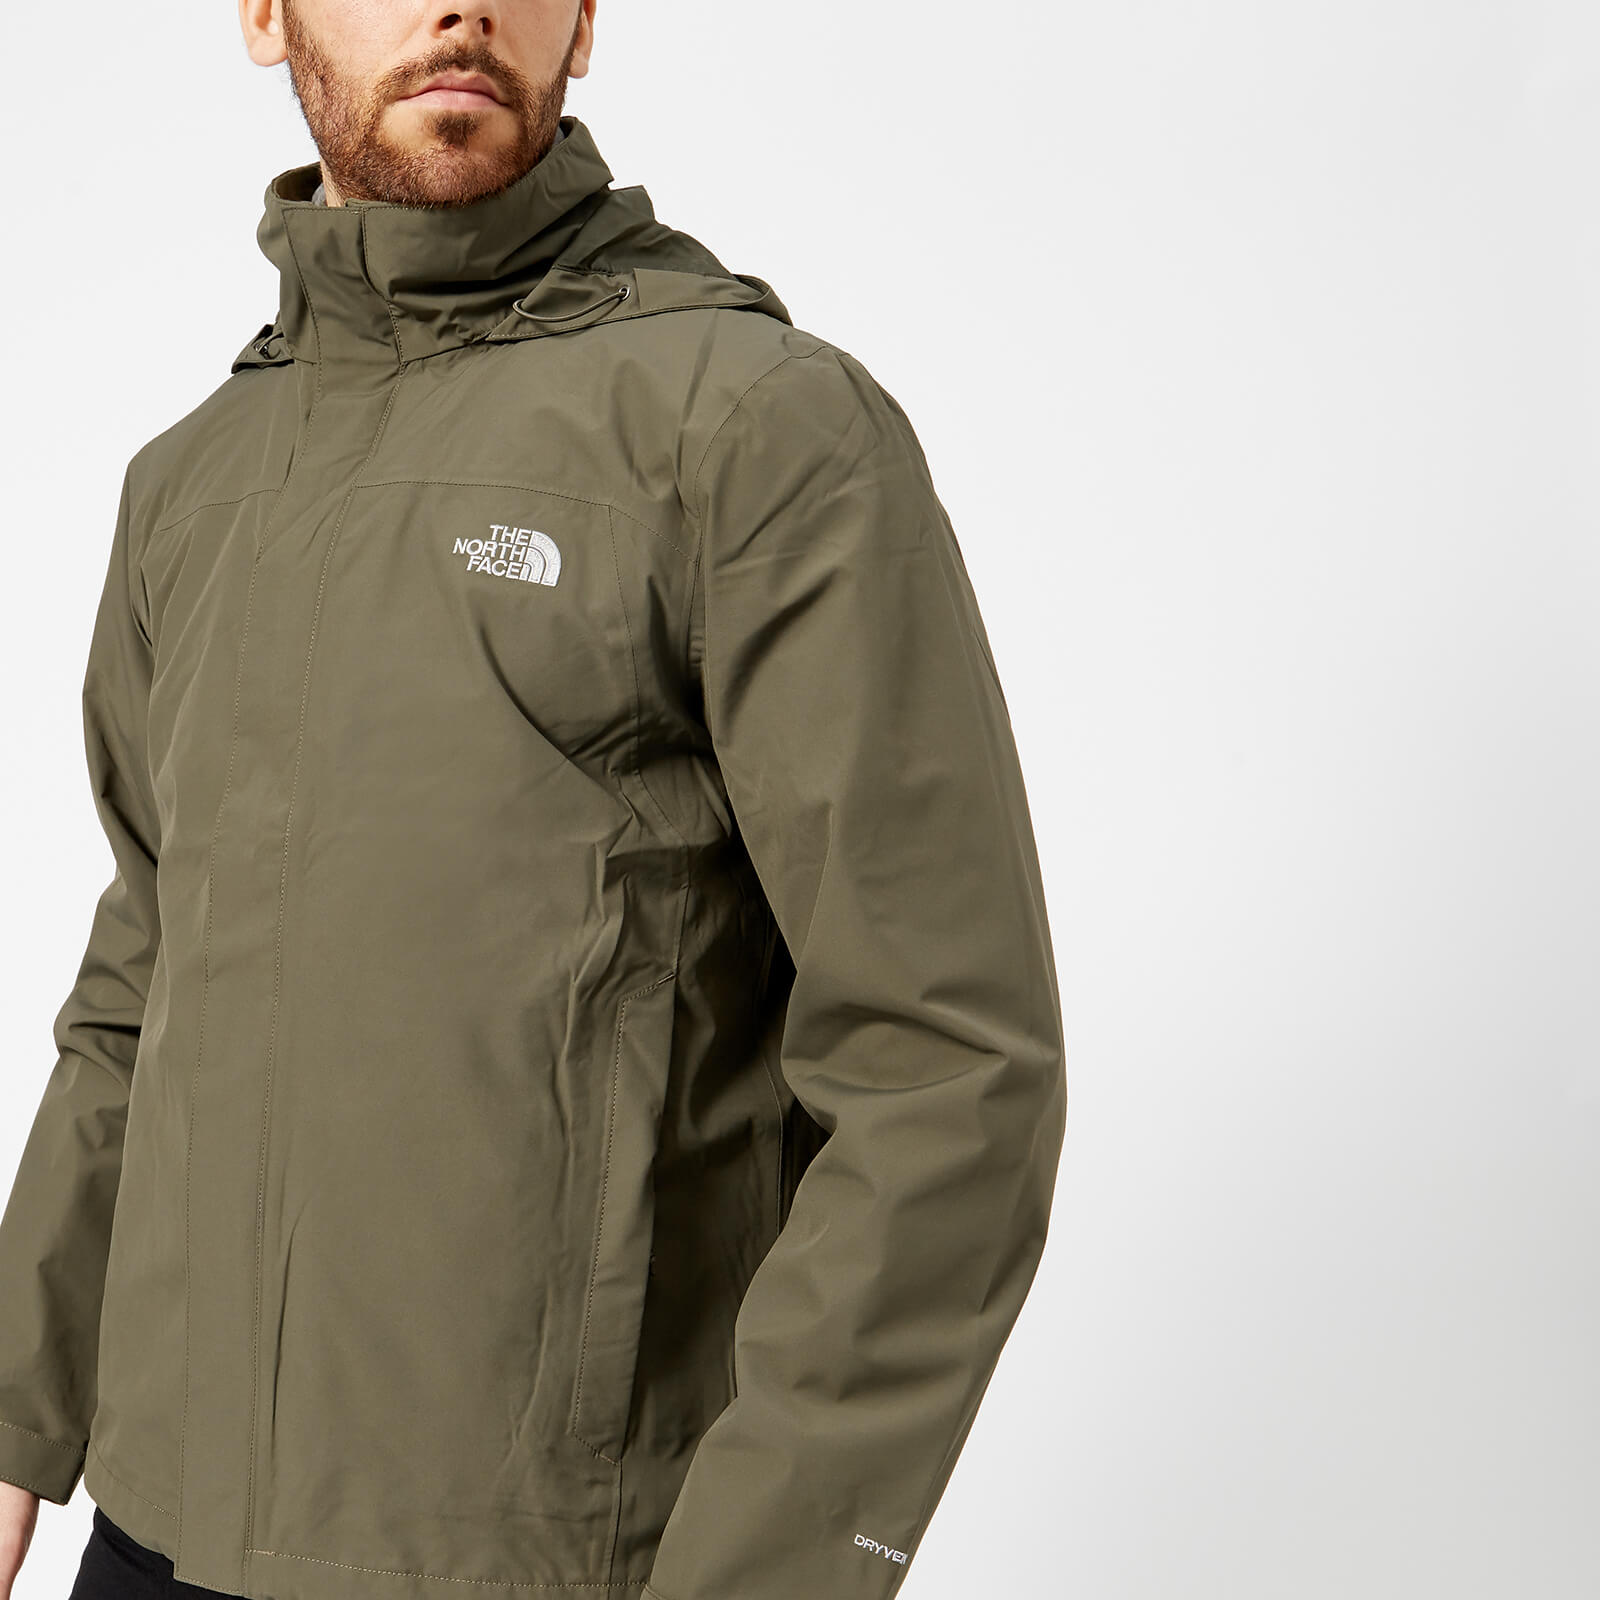 the north face men's sangro jacket 